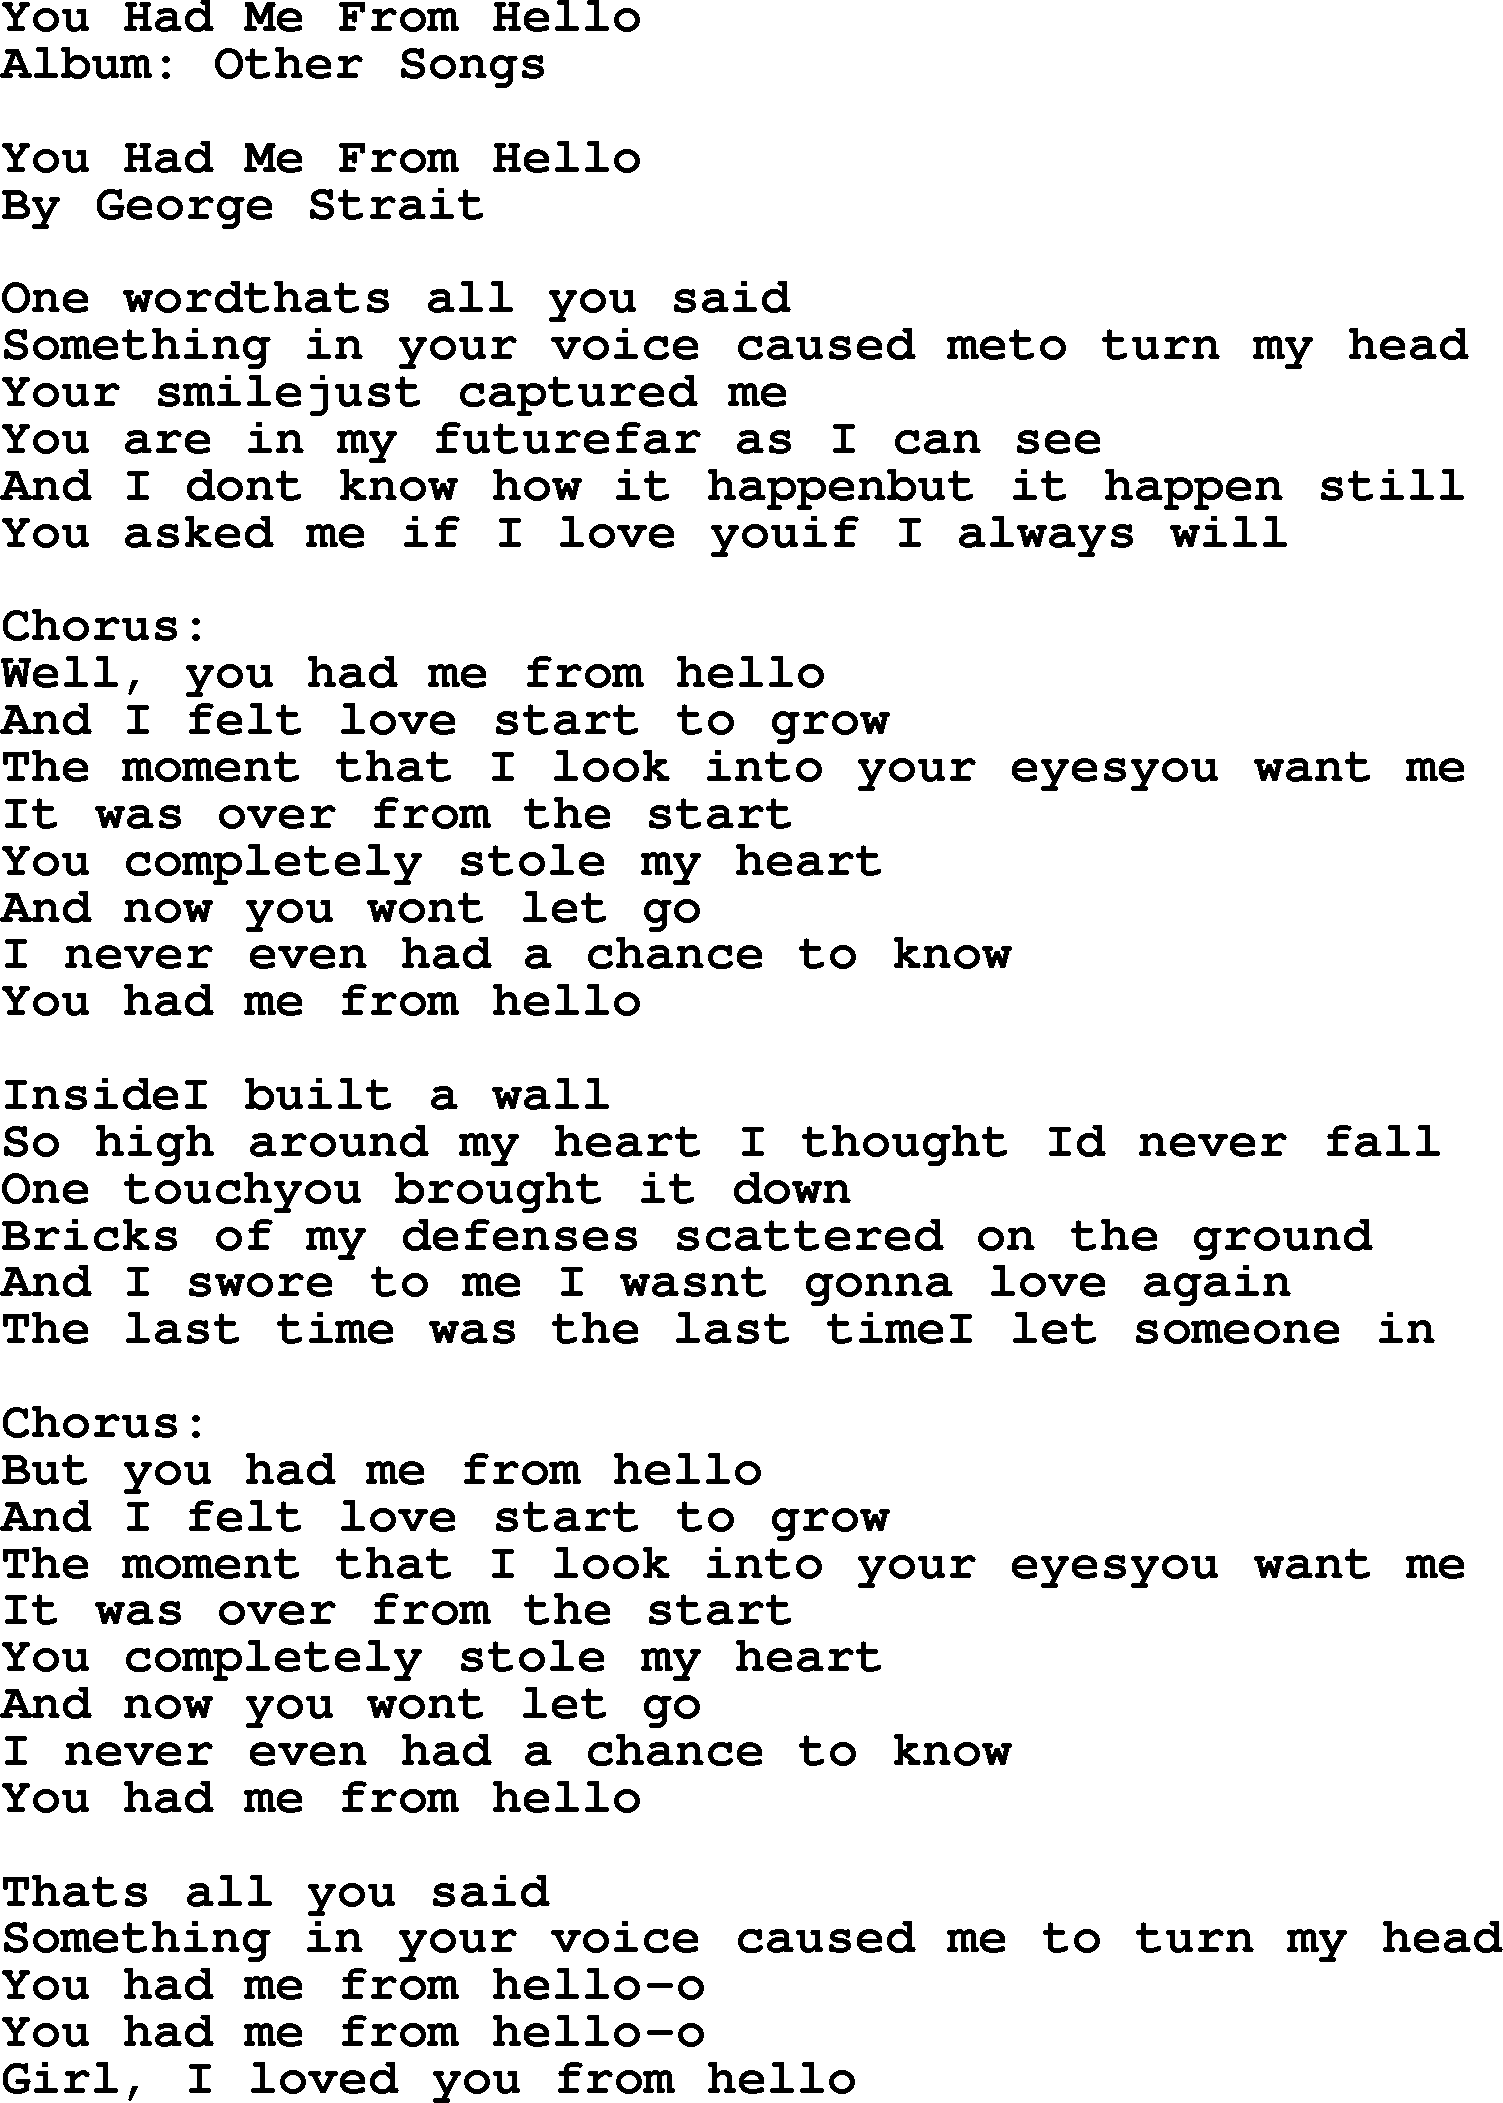 George Strait song: You Had Me From Hello, lyrics